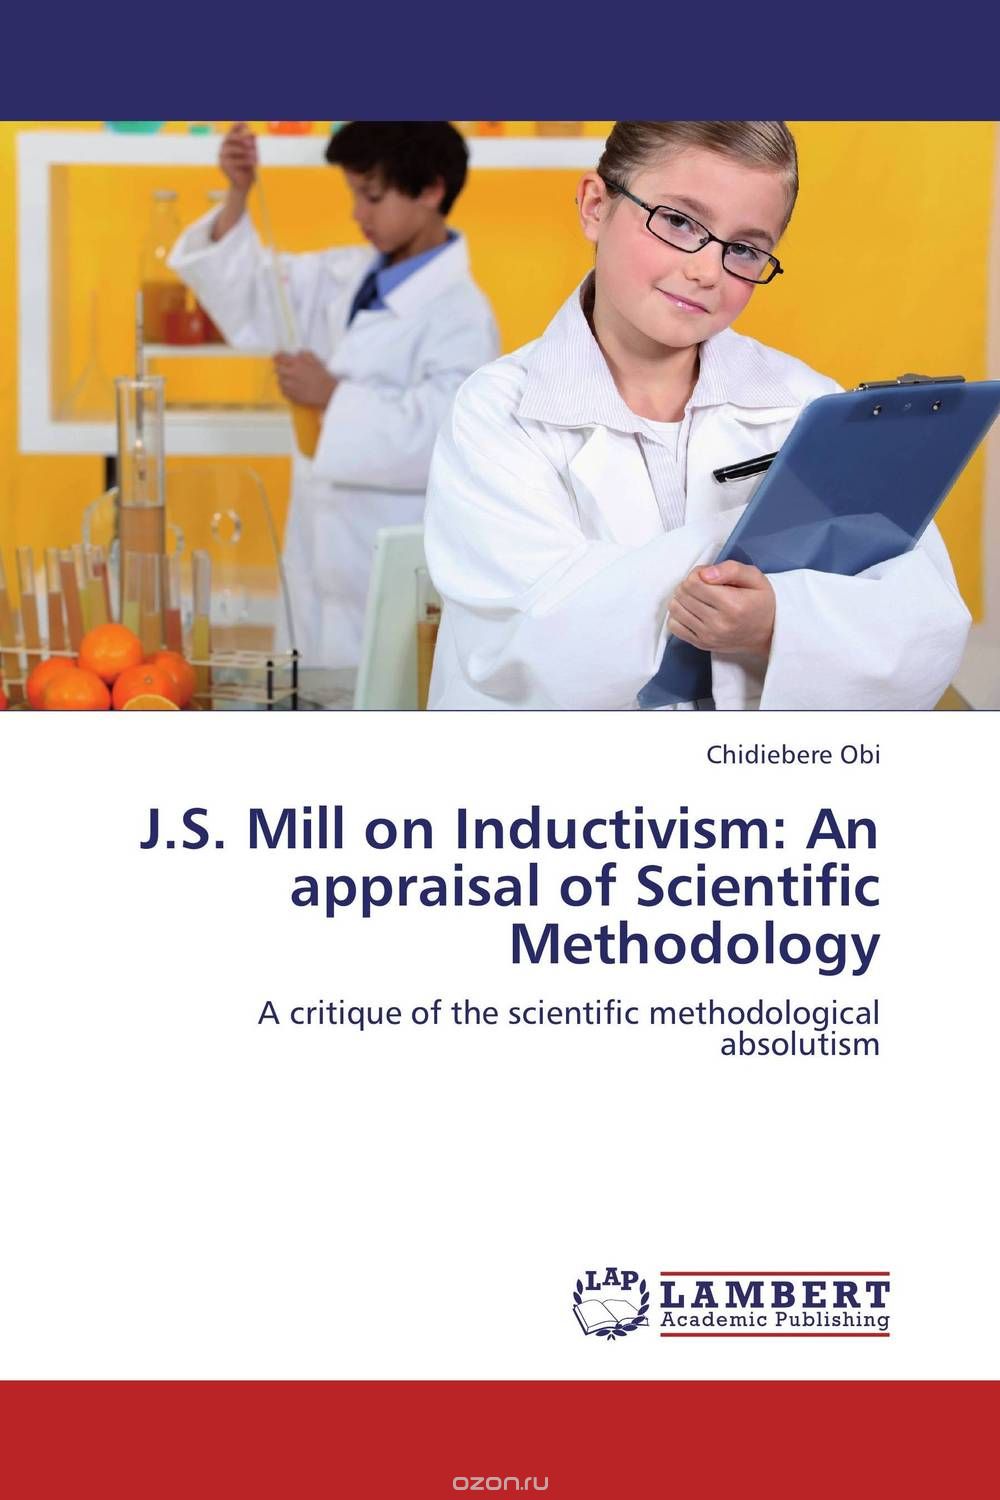 J.S. Mill on Inductivism: An appraisal of Scientific Methodology